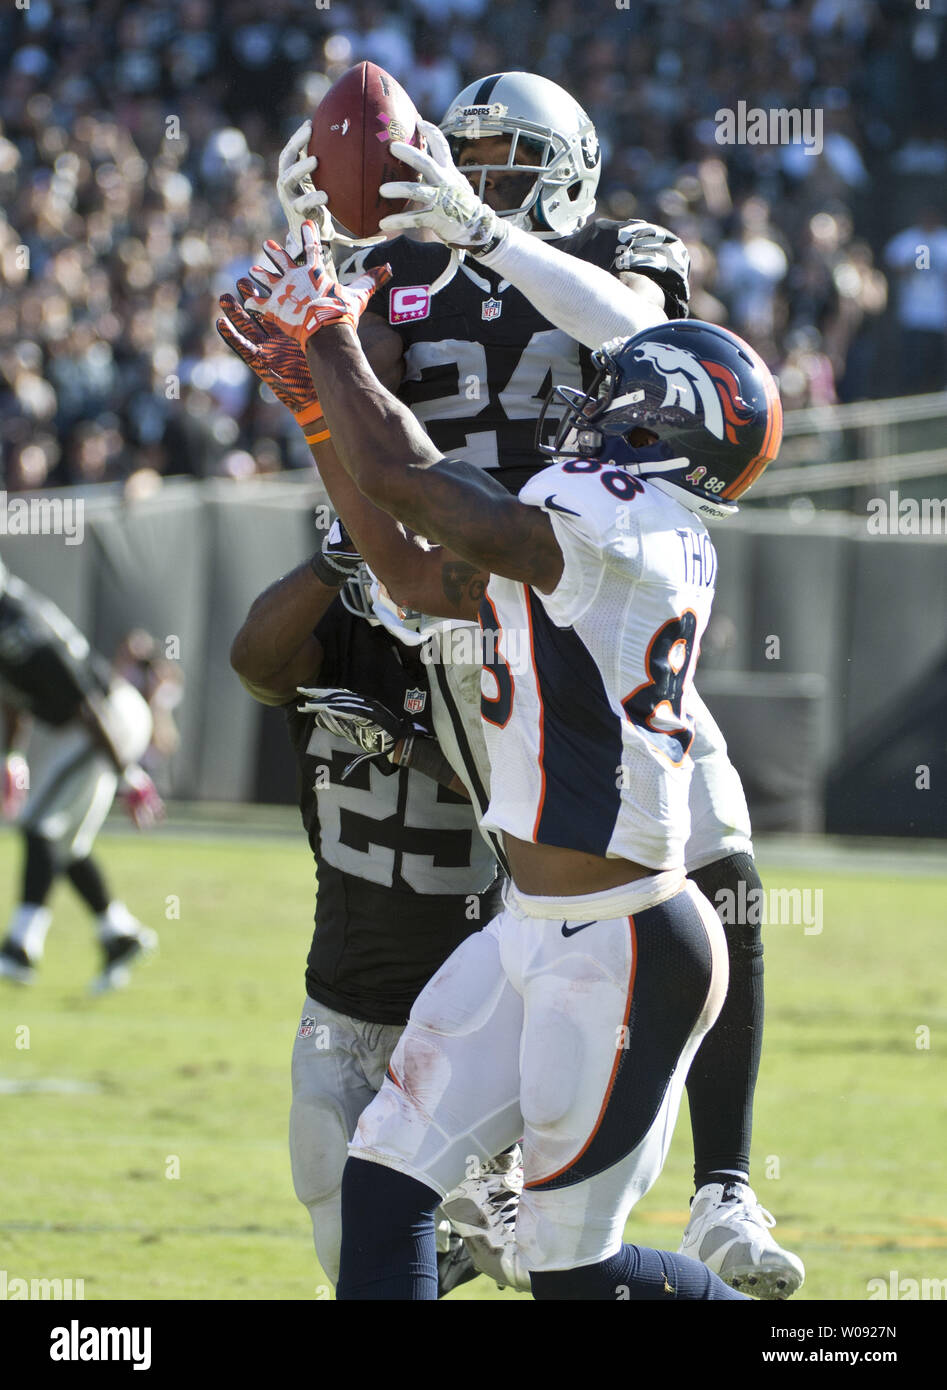 Oakland Raiders Charles Woodson (24) goes high to intercept a Denver Broncos Peyton Manning pass intended for Demaryius Thomas in the third quarter at O.co Coliseum in Oakland, California on October 11, 2015. The Broncos defeated the Raiders 16-10.  Photo by Terry Schmitt/UPI Stock Photo